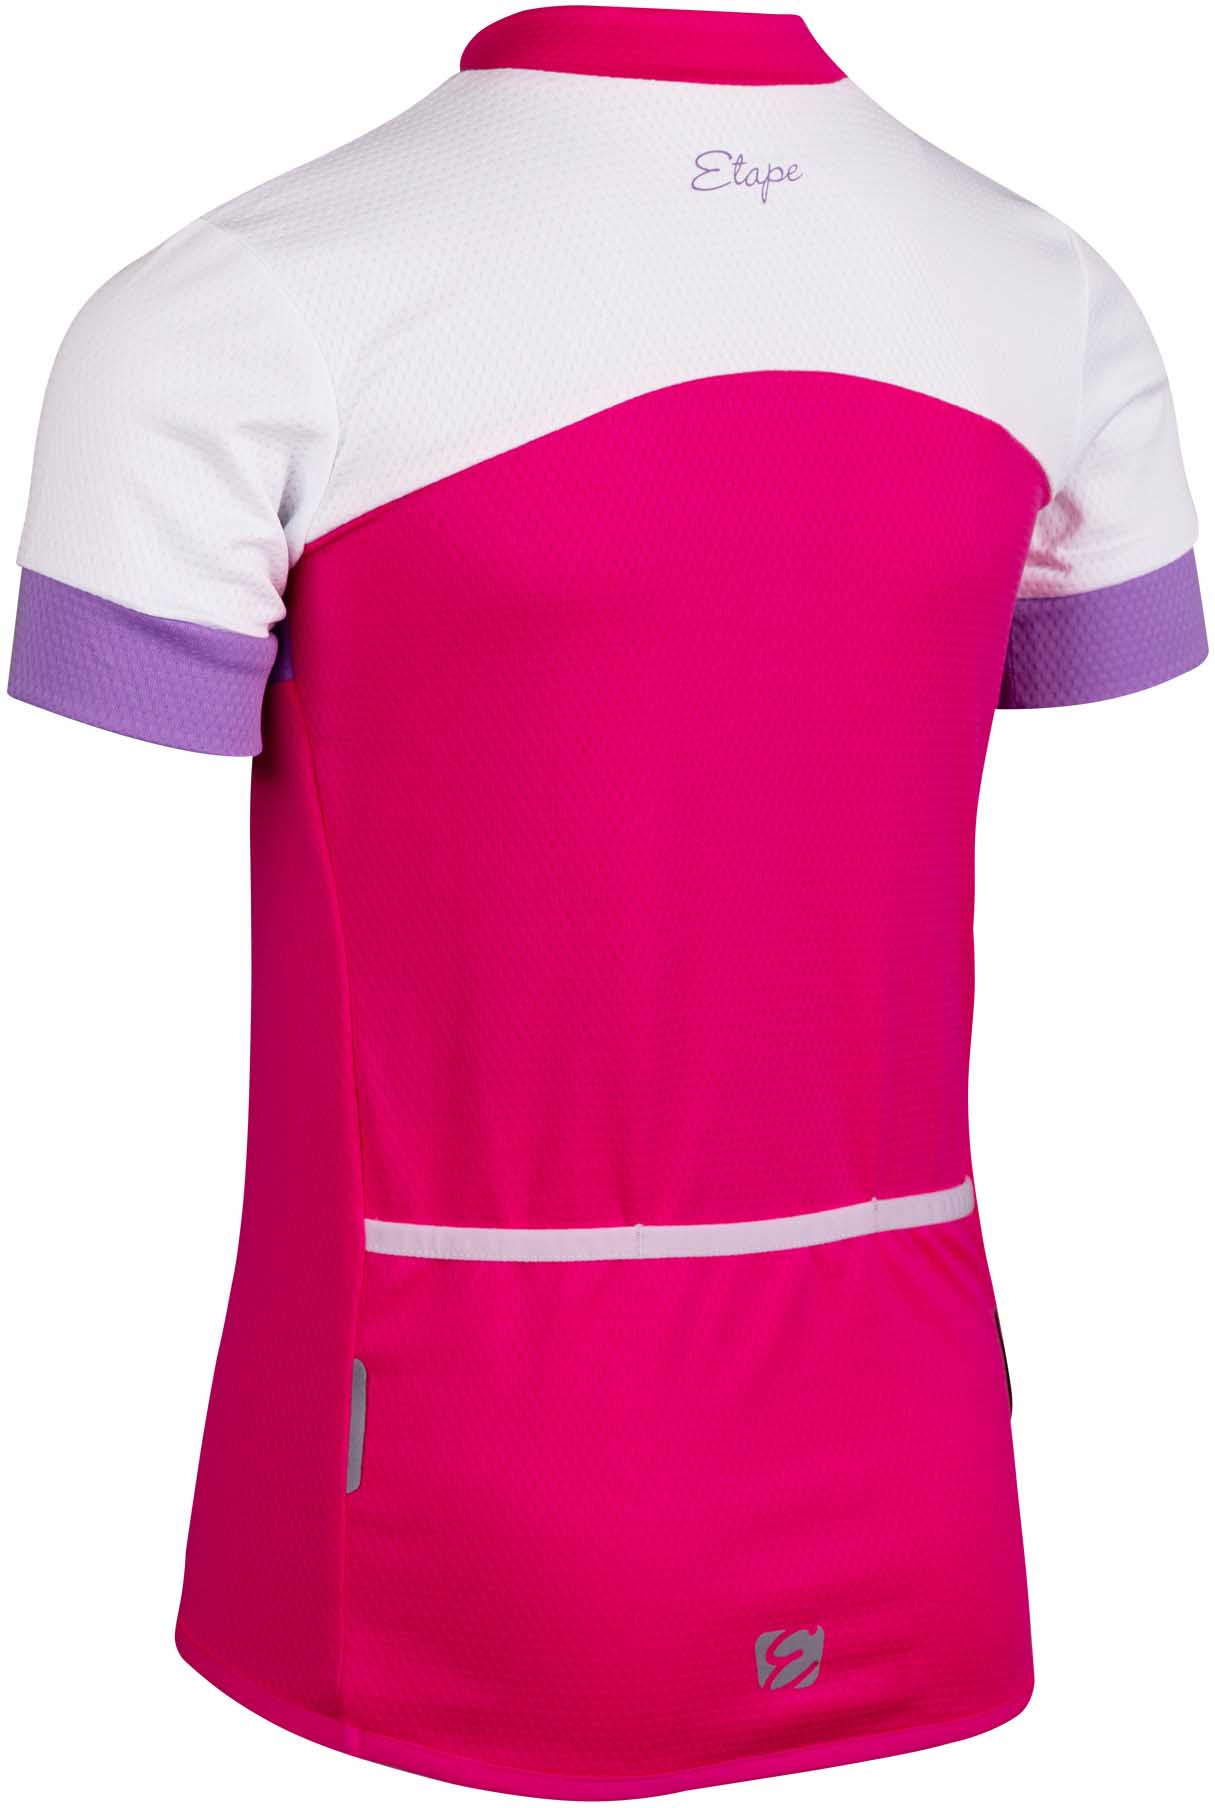 Children's cycling jersey